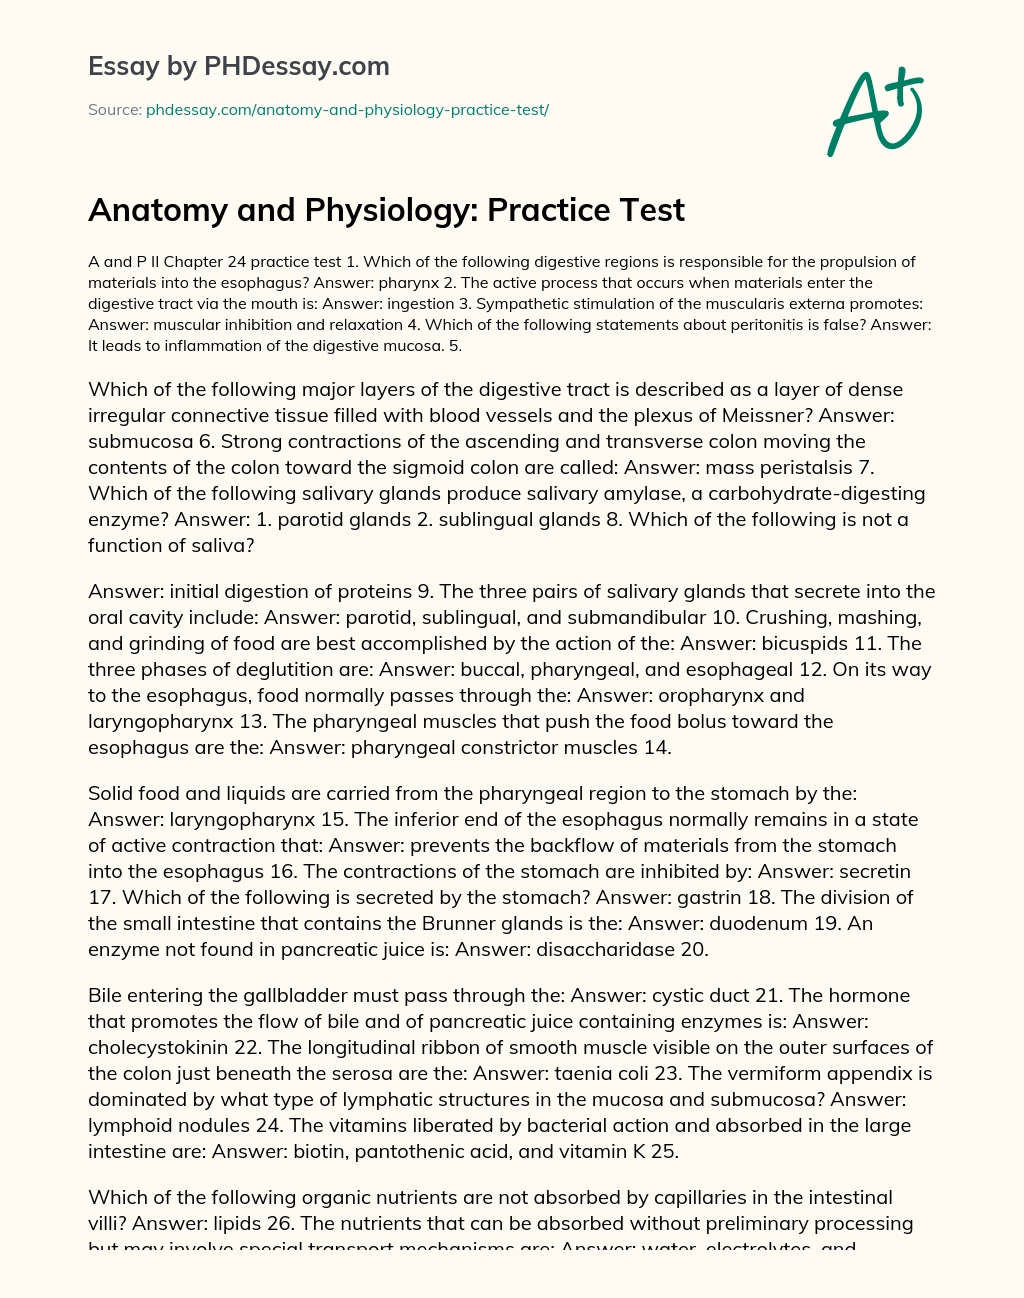 Anatomy and Physiology: Practice Test essay